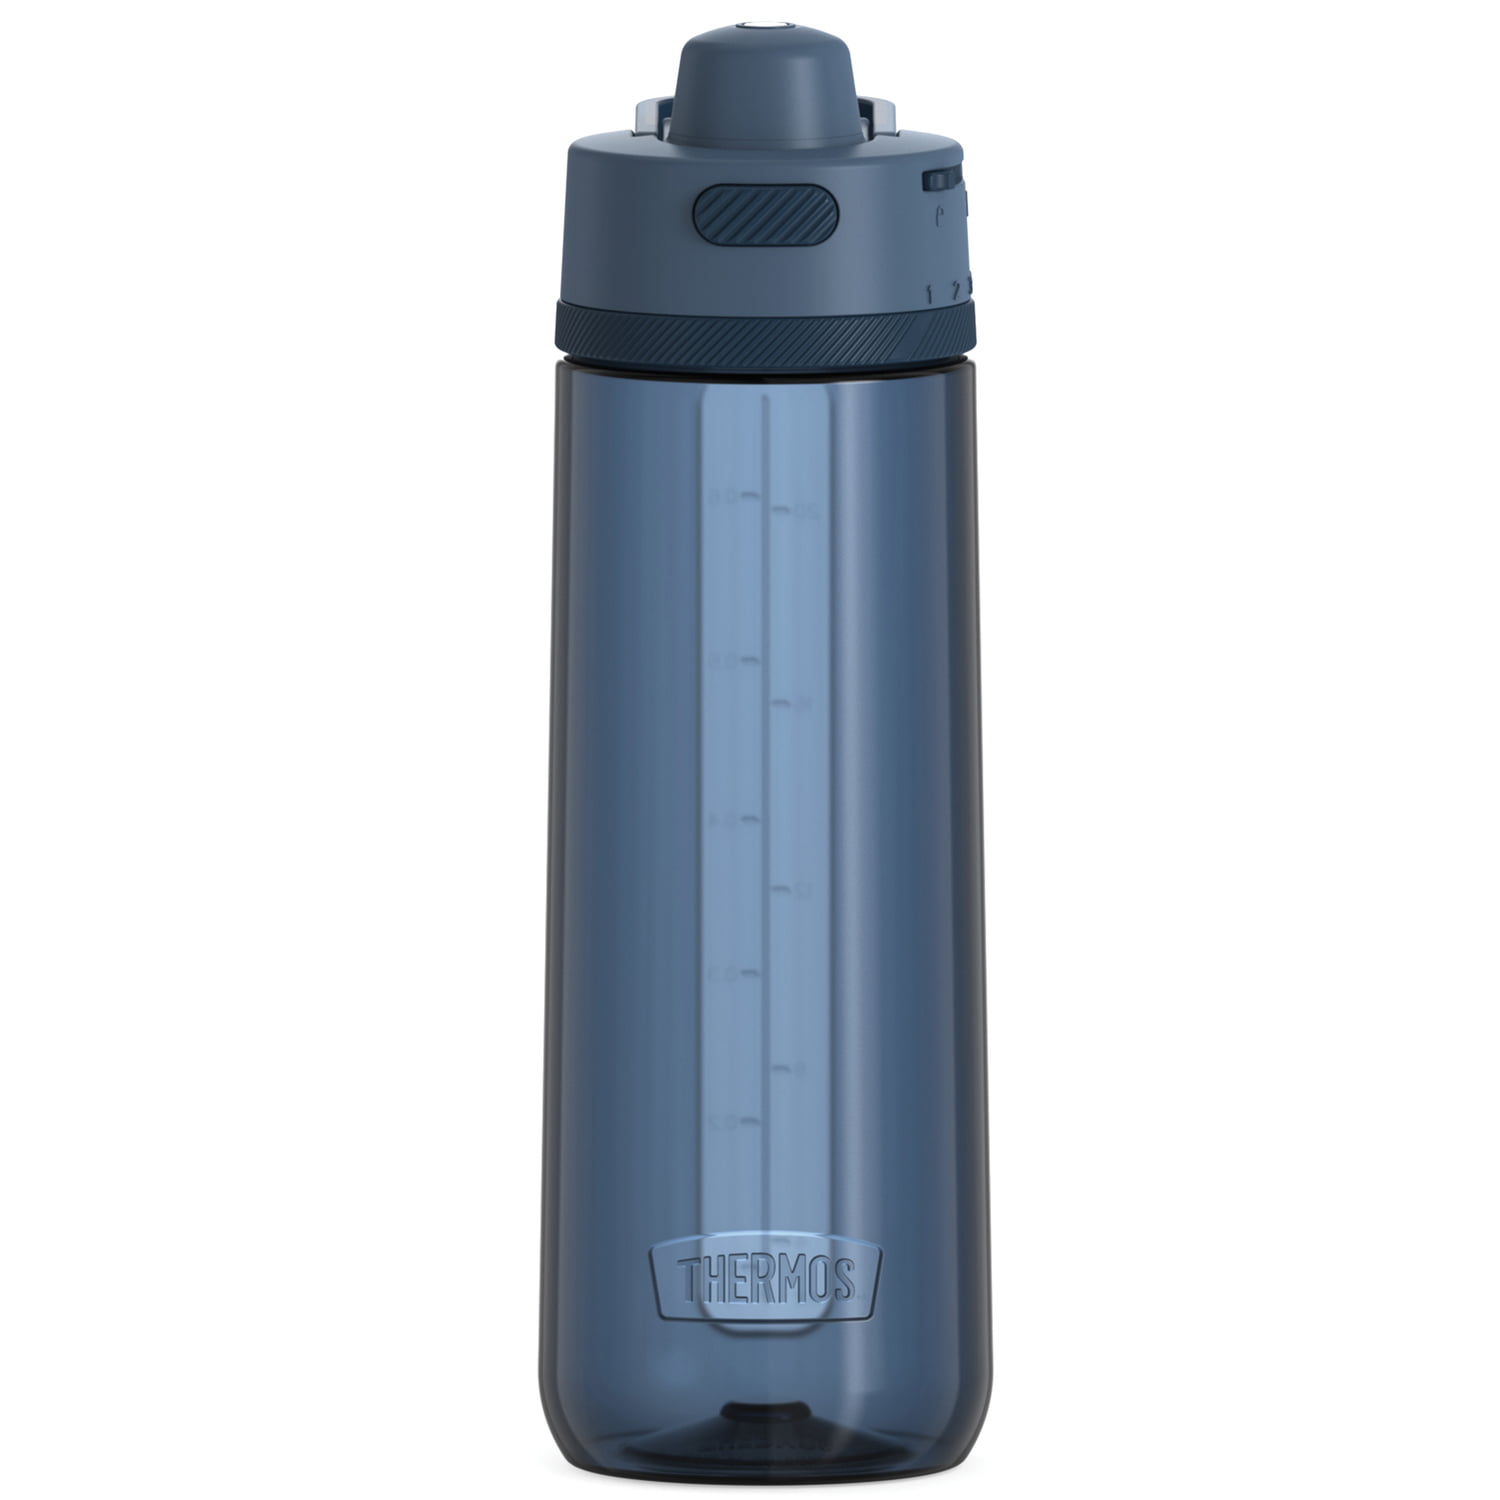 BlueThermos Sip Journey Stainless Steel Hydration Bottle 24 Ounce With Straw 